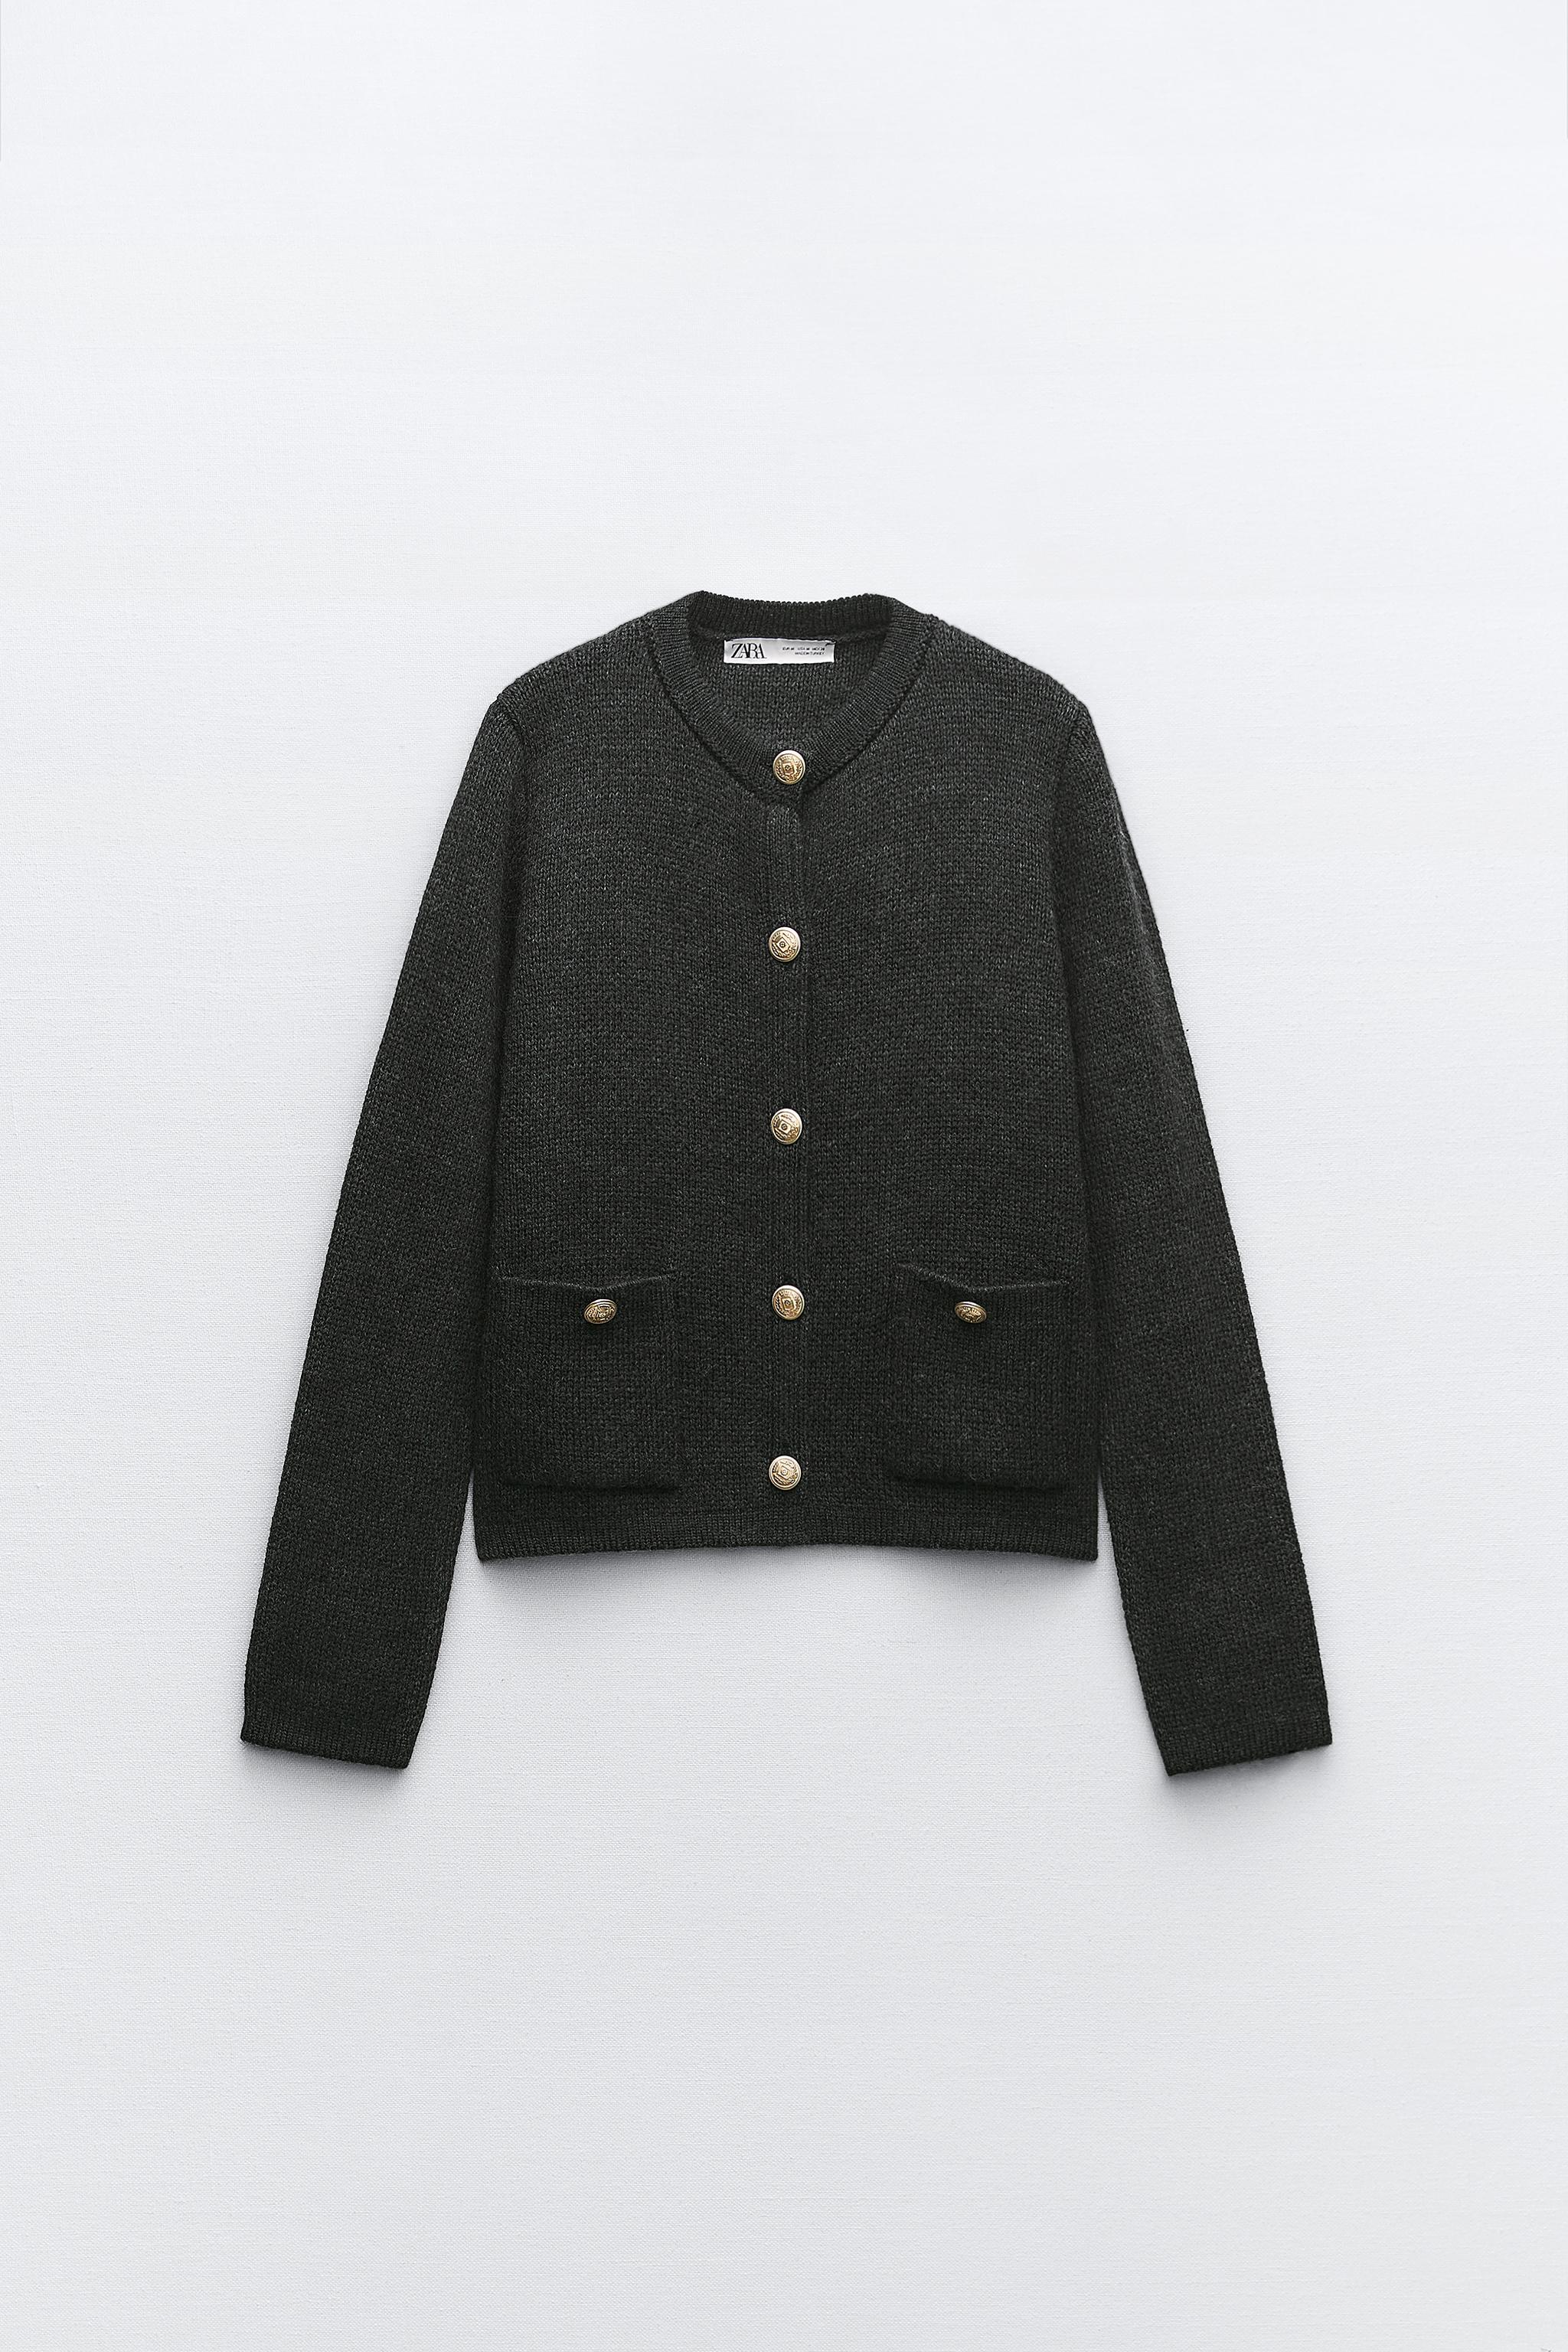 KNIT CARDIGAN WITH GOLDEN BUTTONS - Ecru | ZARA United States